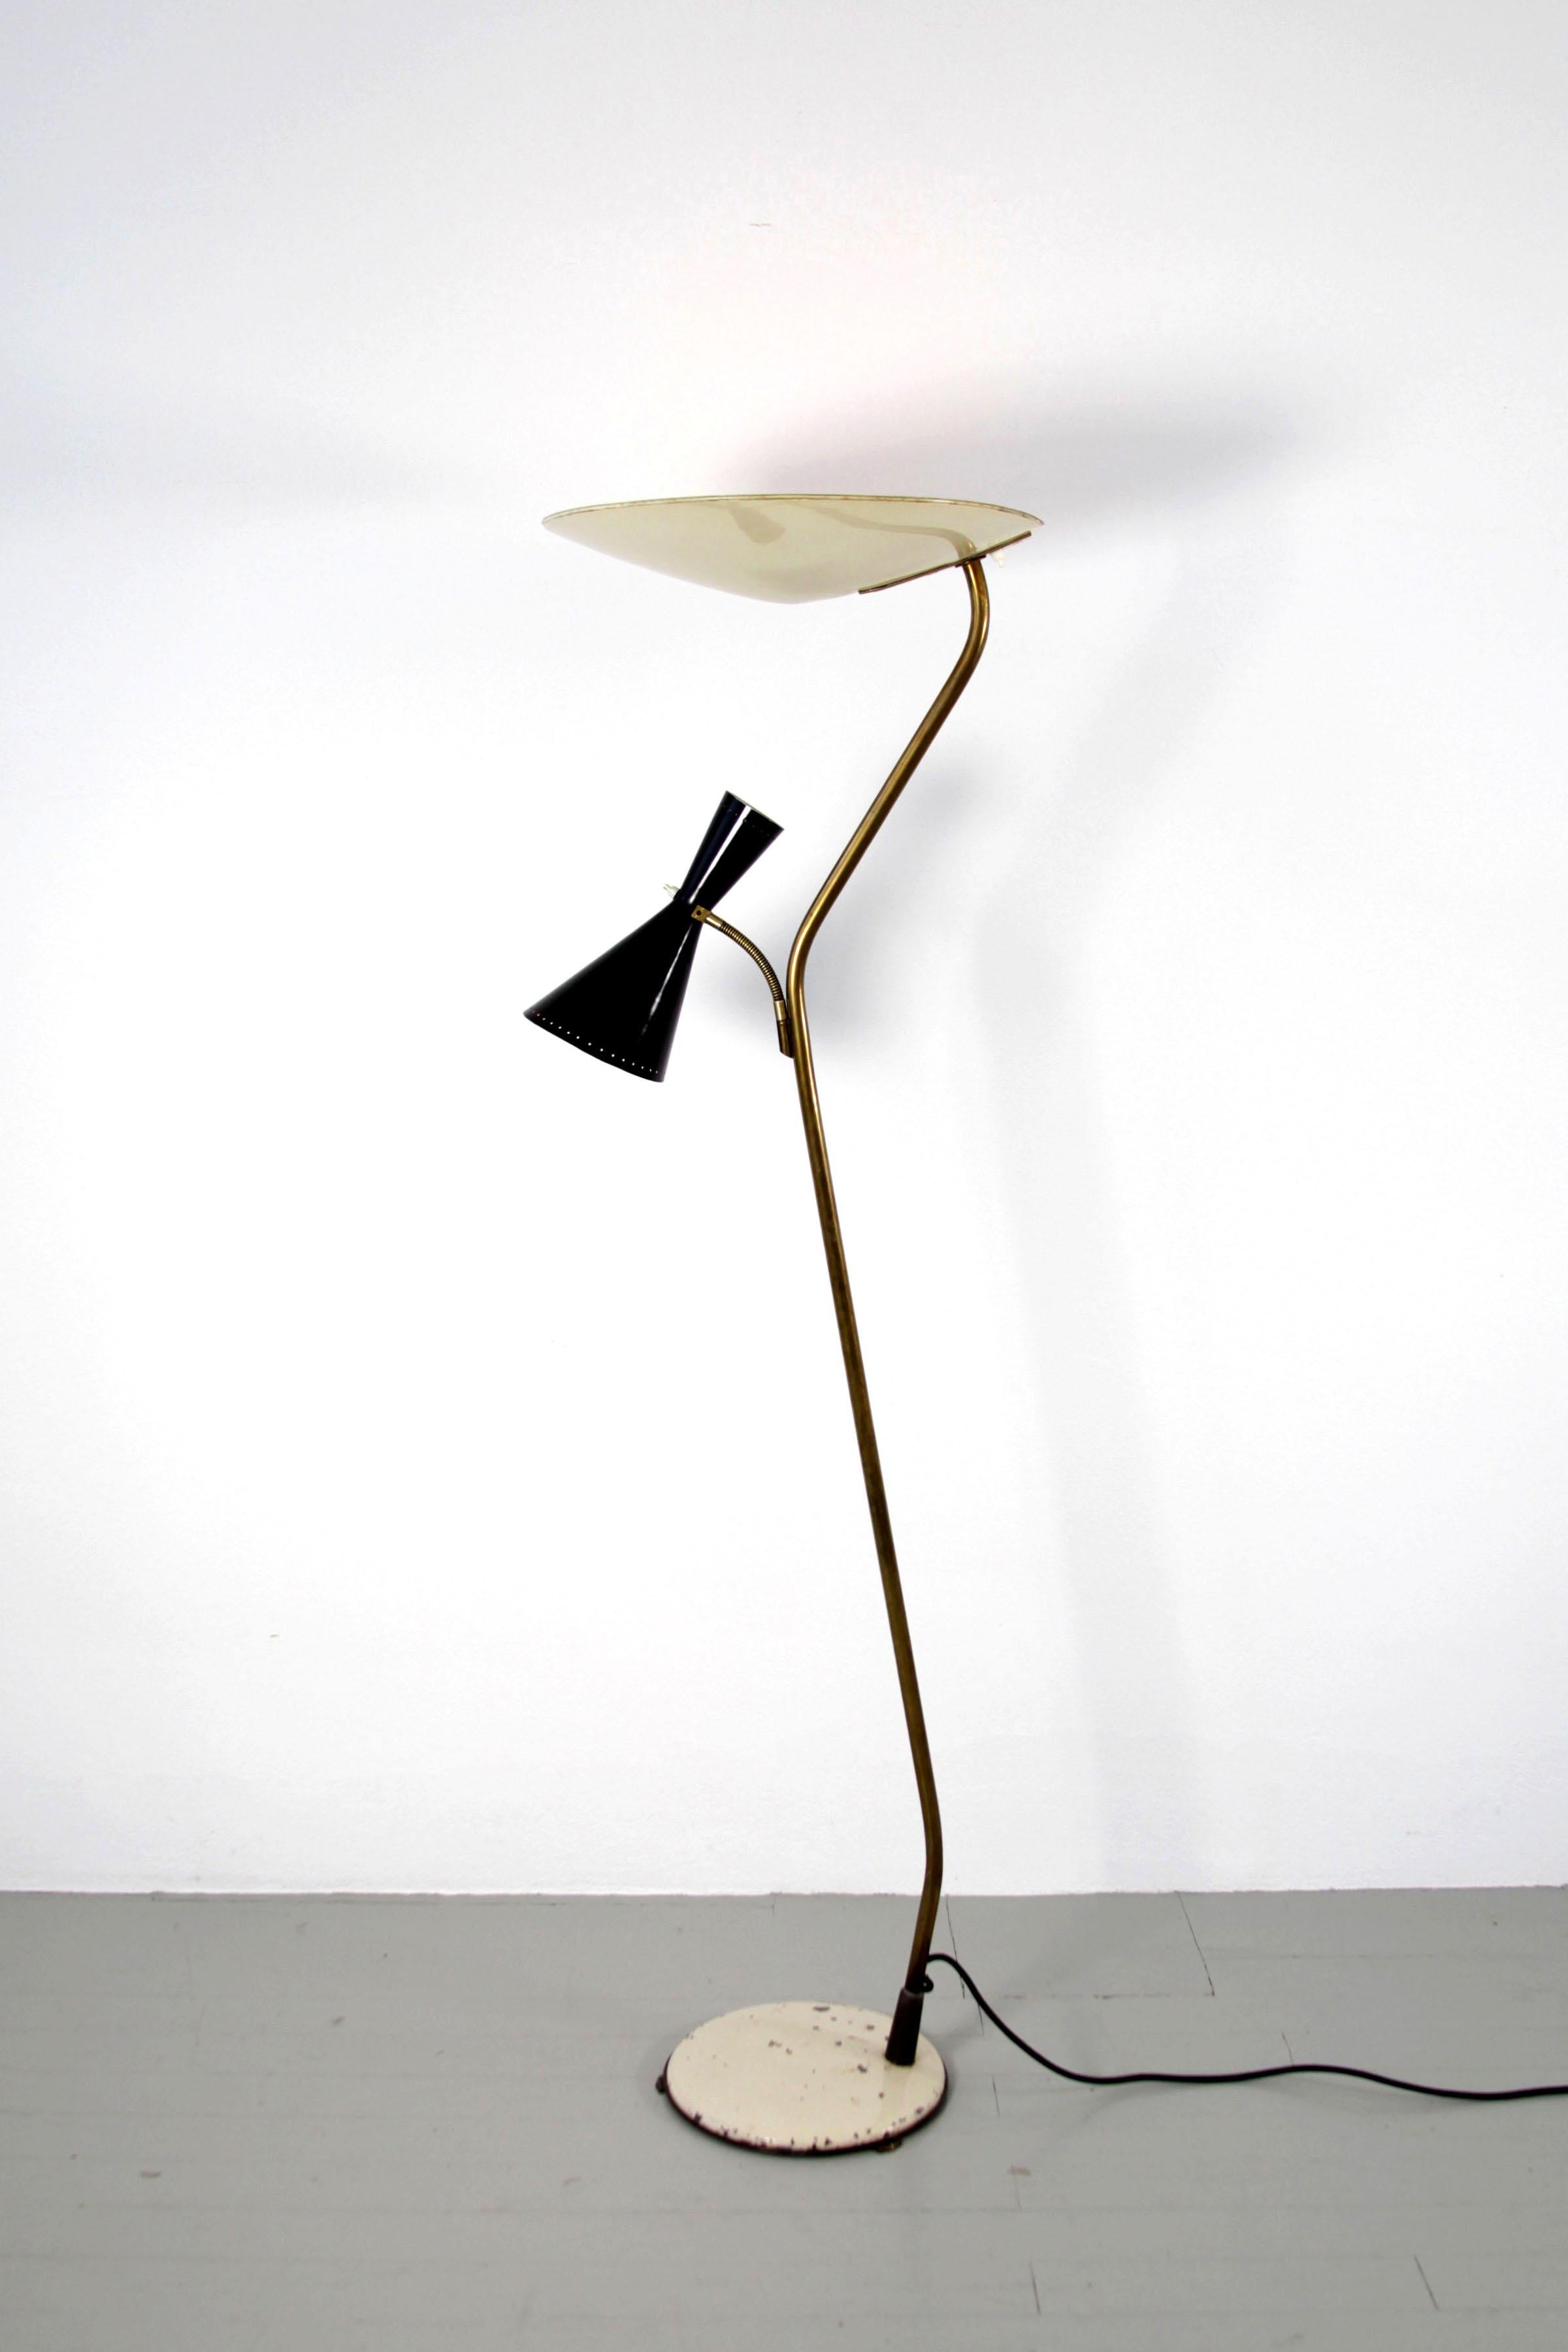 
A rare find from the 1950s, this floor lamp from Eberth Zürich, Switzerland. Crafted from brass, it boasts lacquered metal shades that offer dual functionality: serving as both an uplight and a reading light. Its sleek black and white design adds a